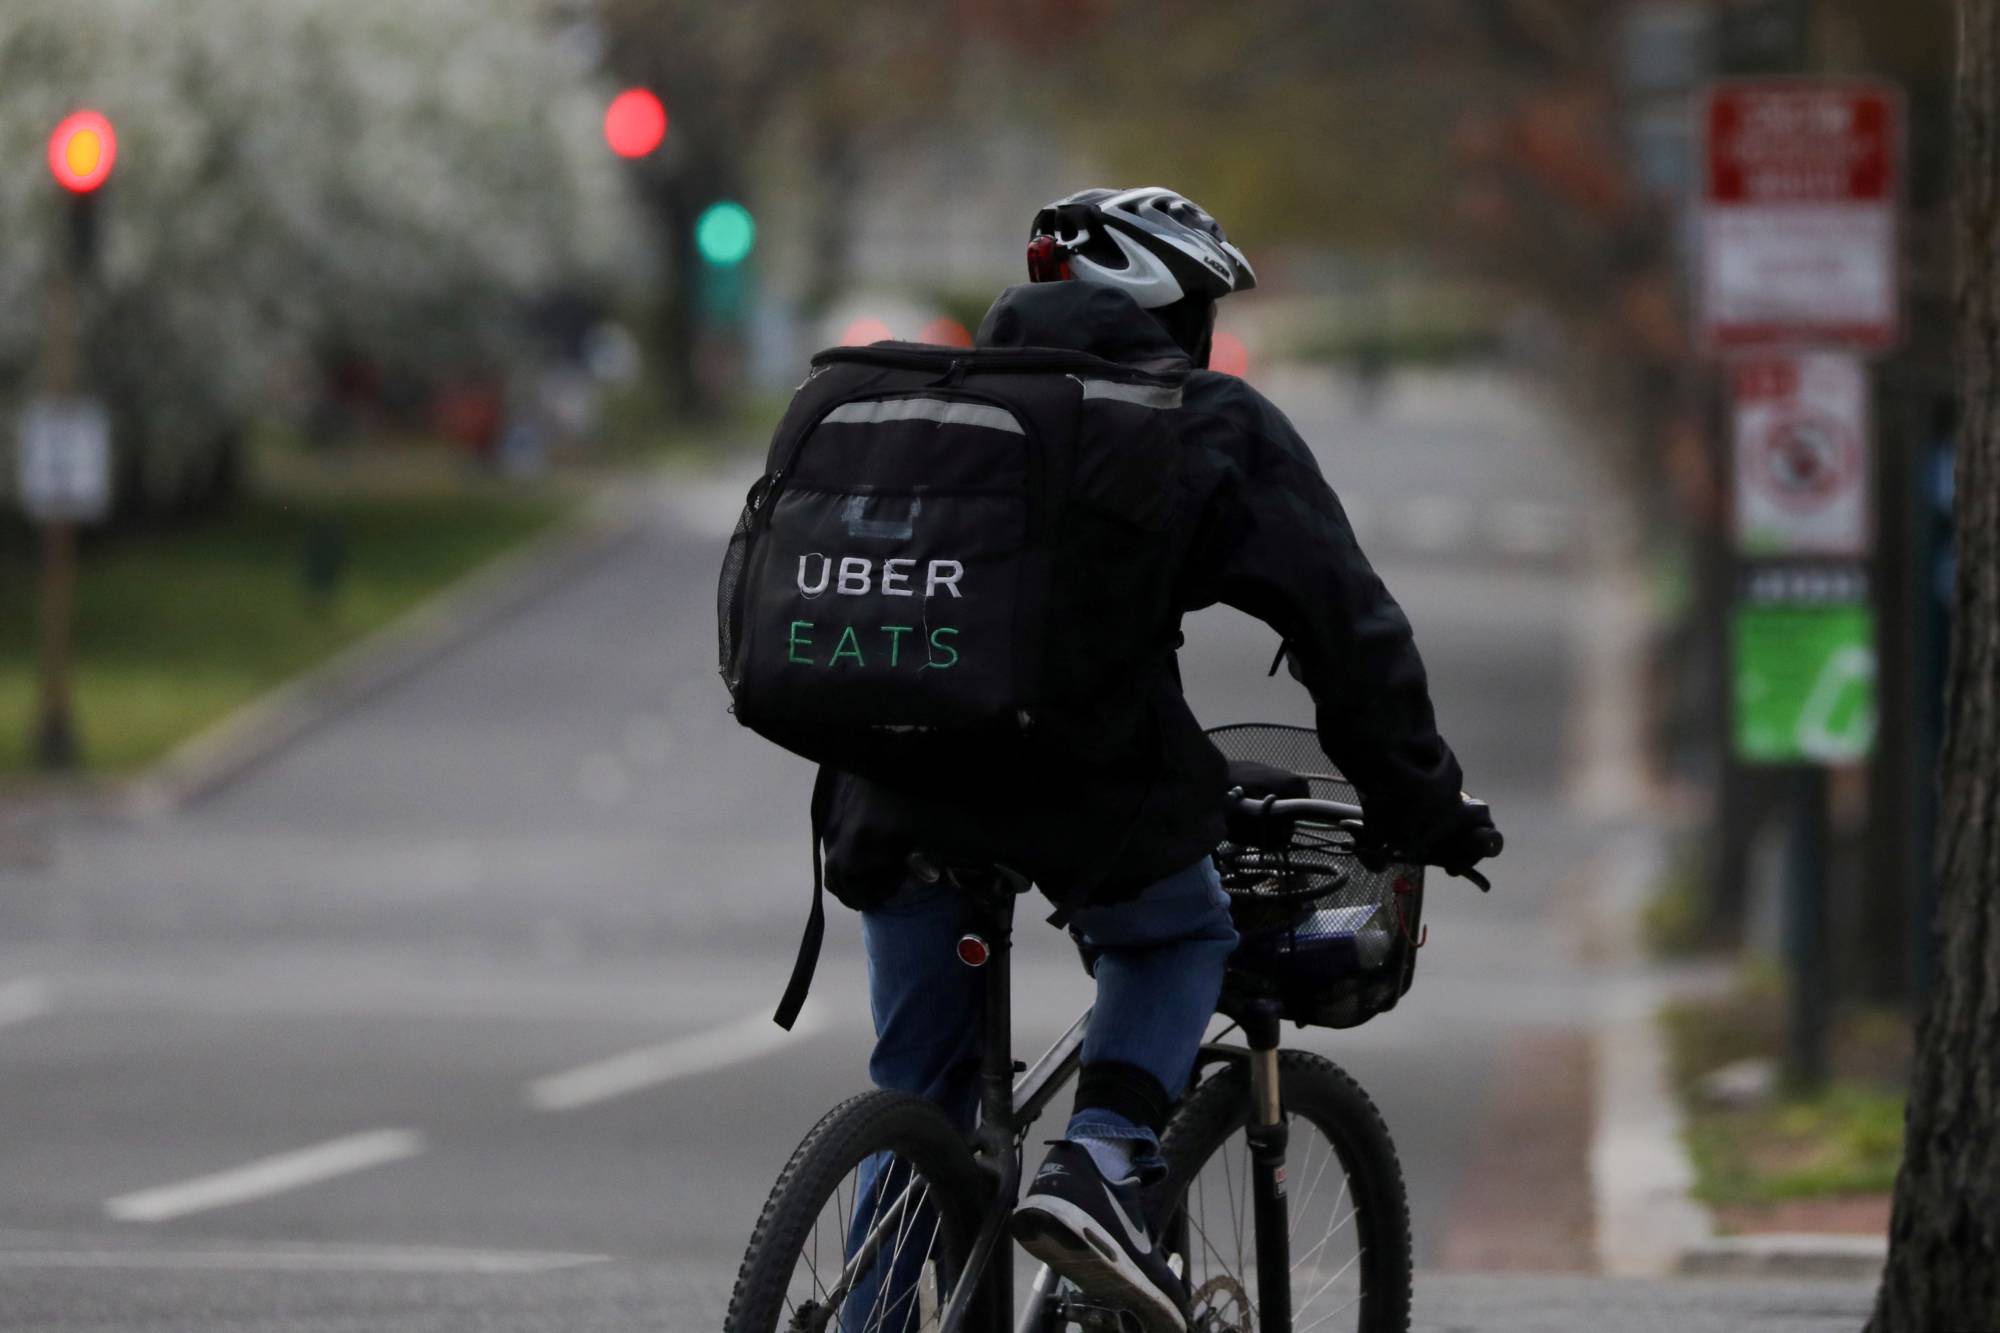 The union representing staff for Uber Technologies Inc.'s food delivery service said it found about 40 percent of workers involved in 31 accidents between January and March were forced to take leave of over one month due to their injuries. | REUTERS